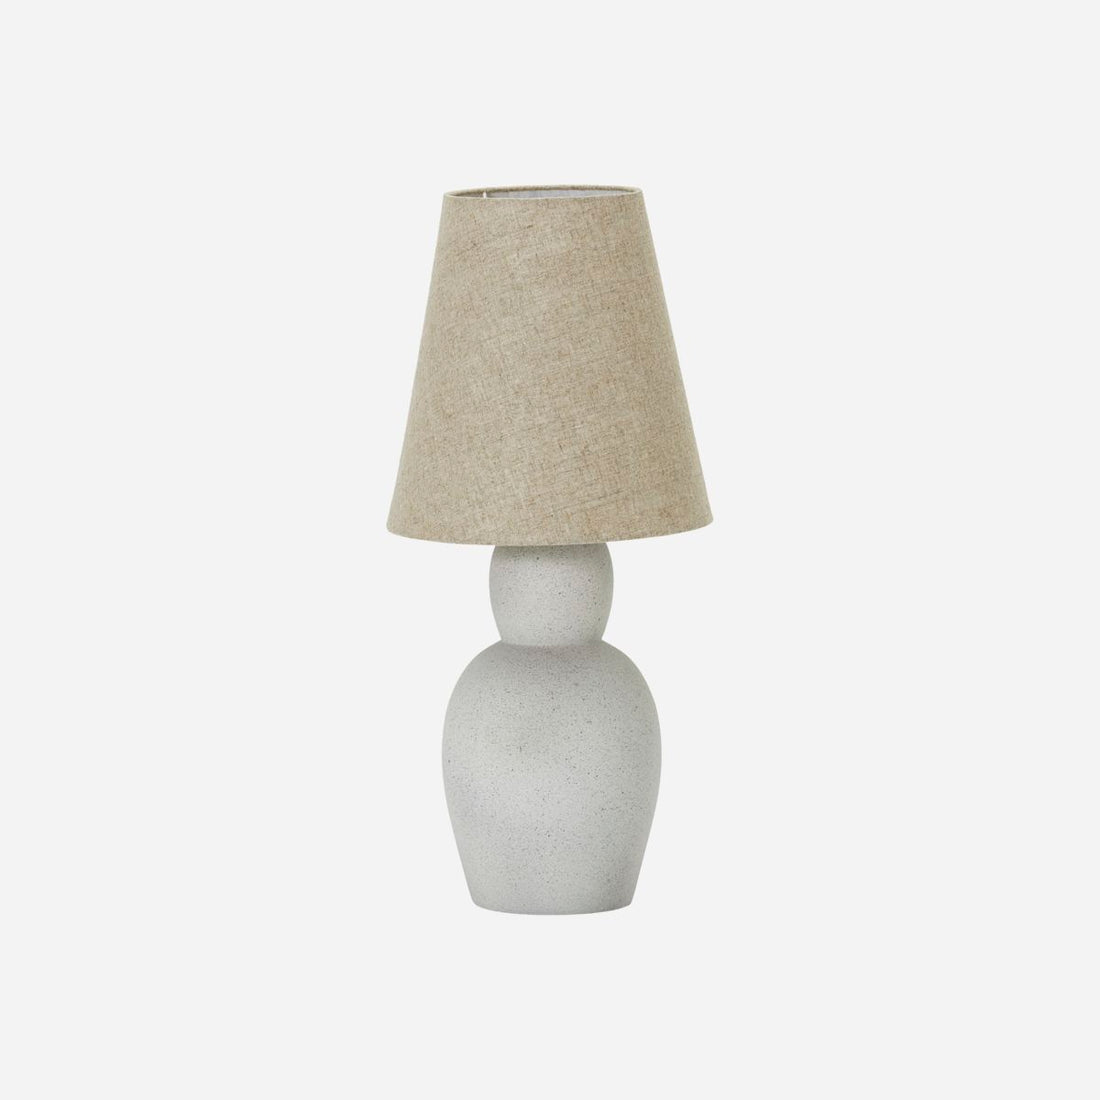 House Doctor table lamp incl. Lampshade, Orga, Sand-H: 67 cm, DIA: 27 cm